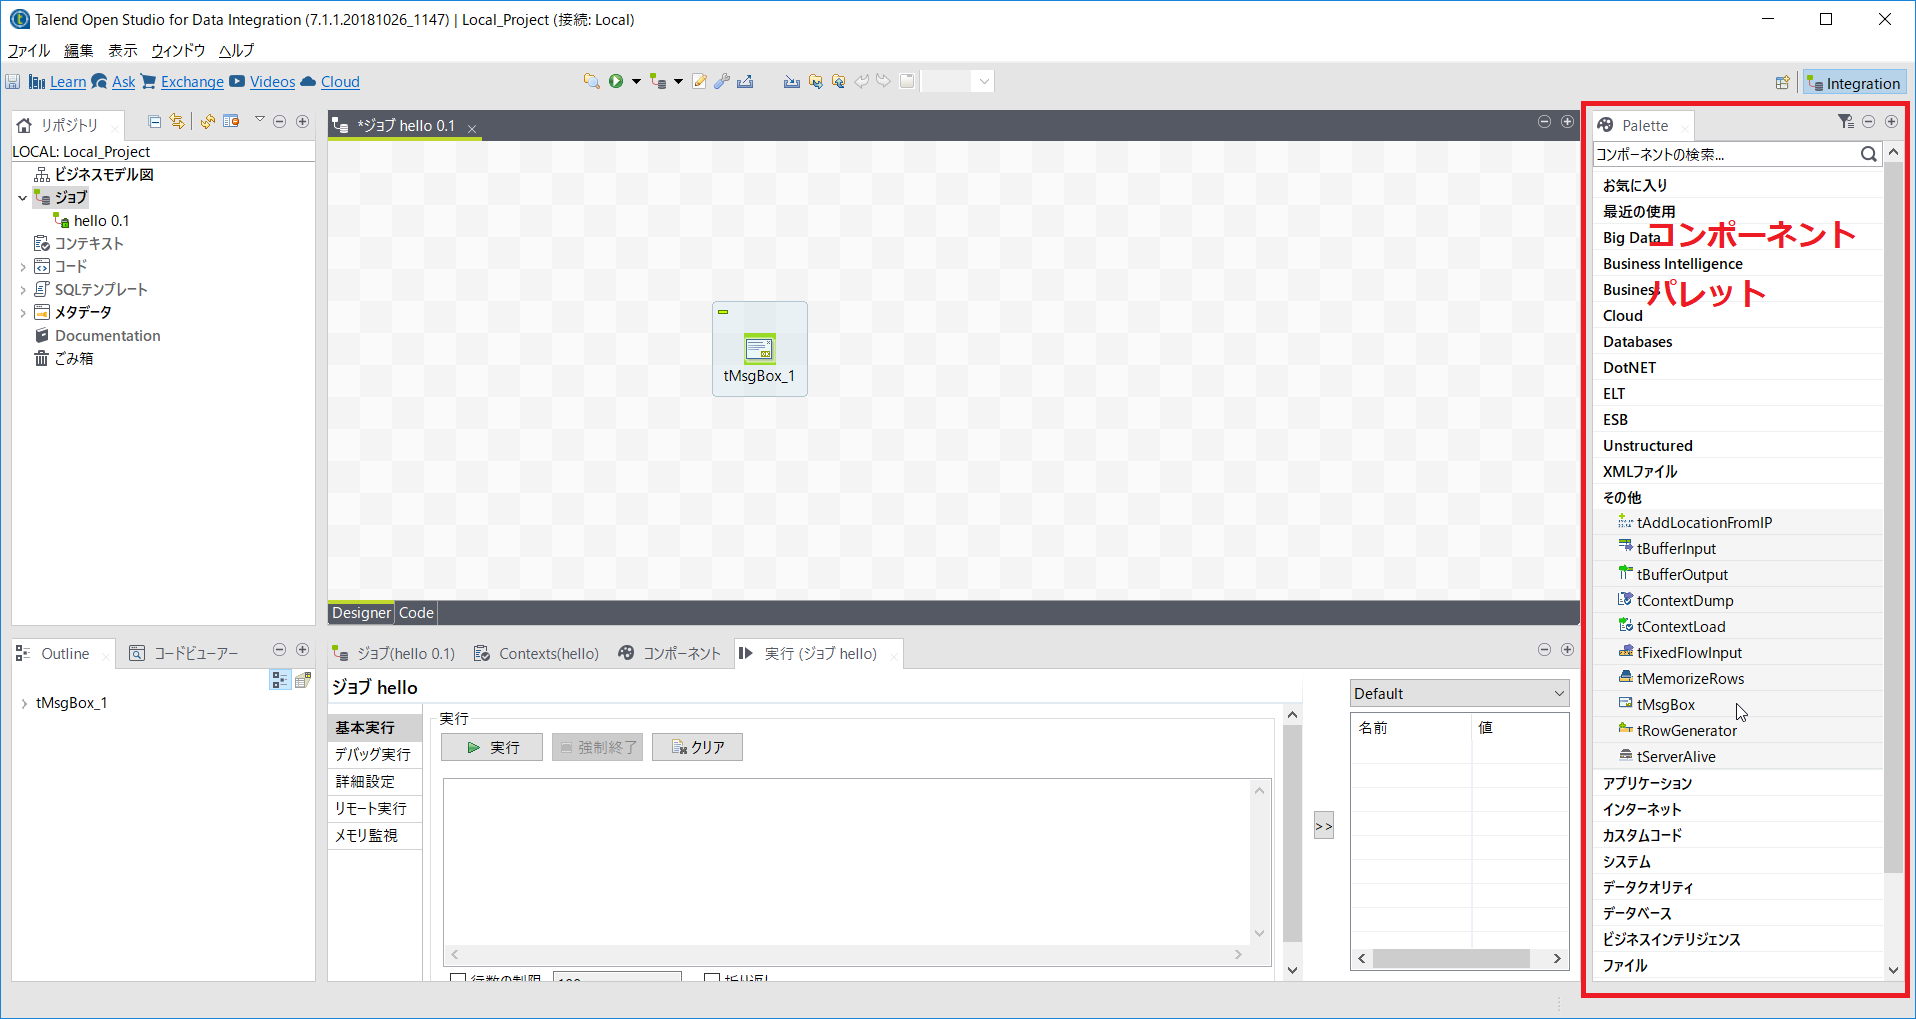 2019-03-09 16_31_39-Talend Open Studio for Data Integration (7.1.1.20181026_1147) _ Local_Project (2.png